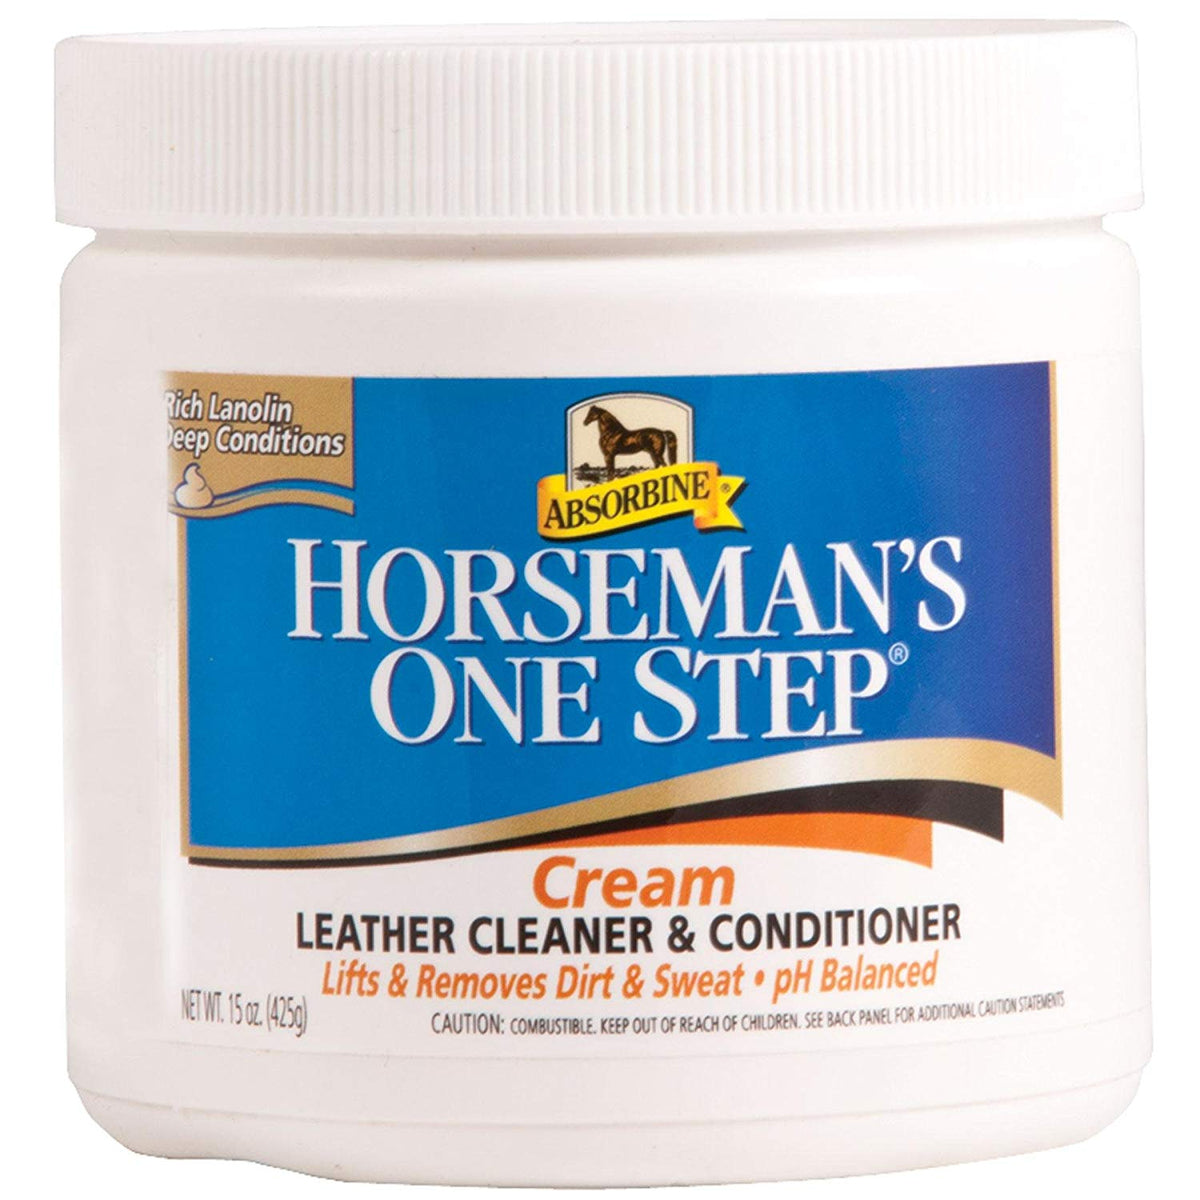 Horseman’s One Step Cream Leather Cleaner and Conditioner